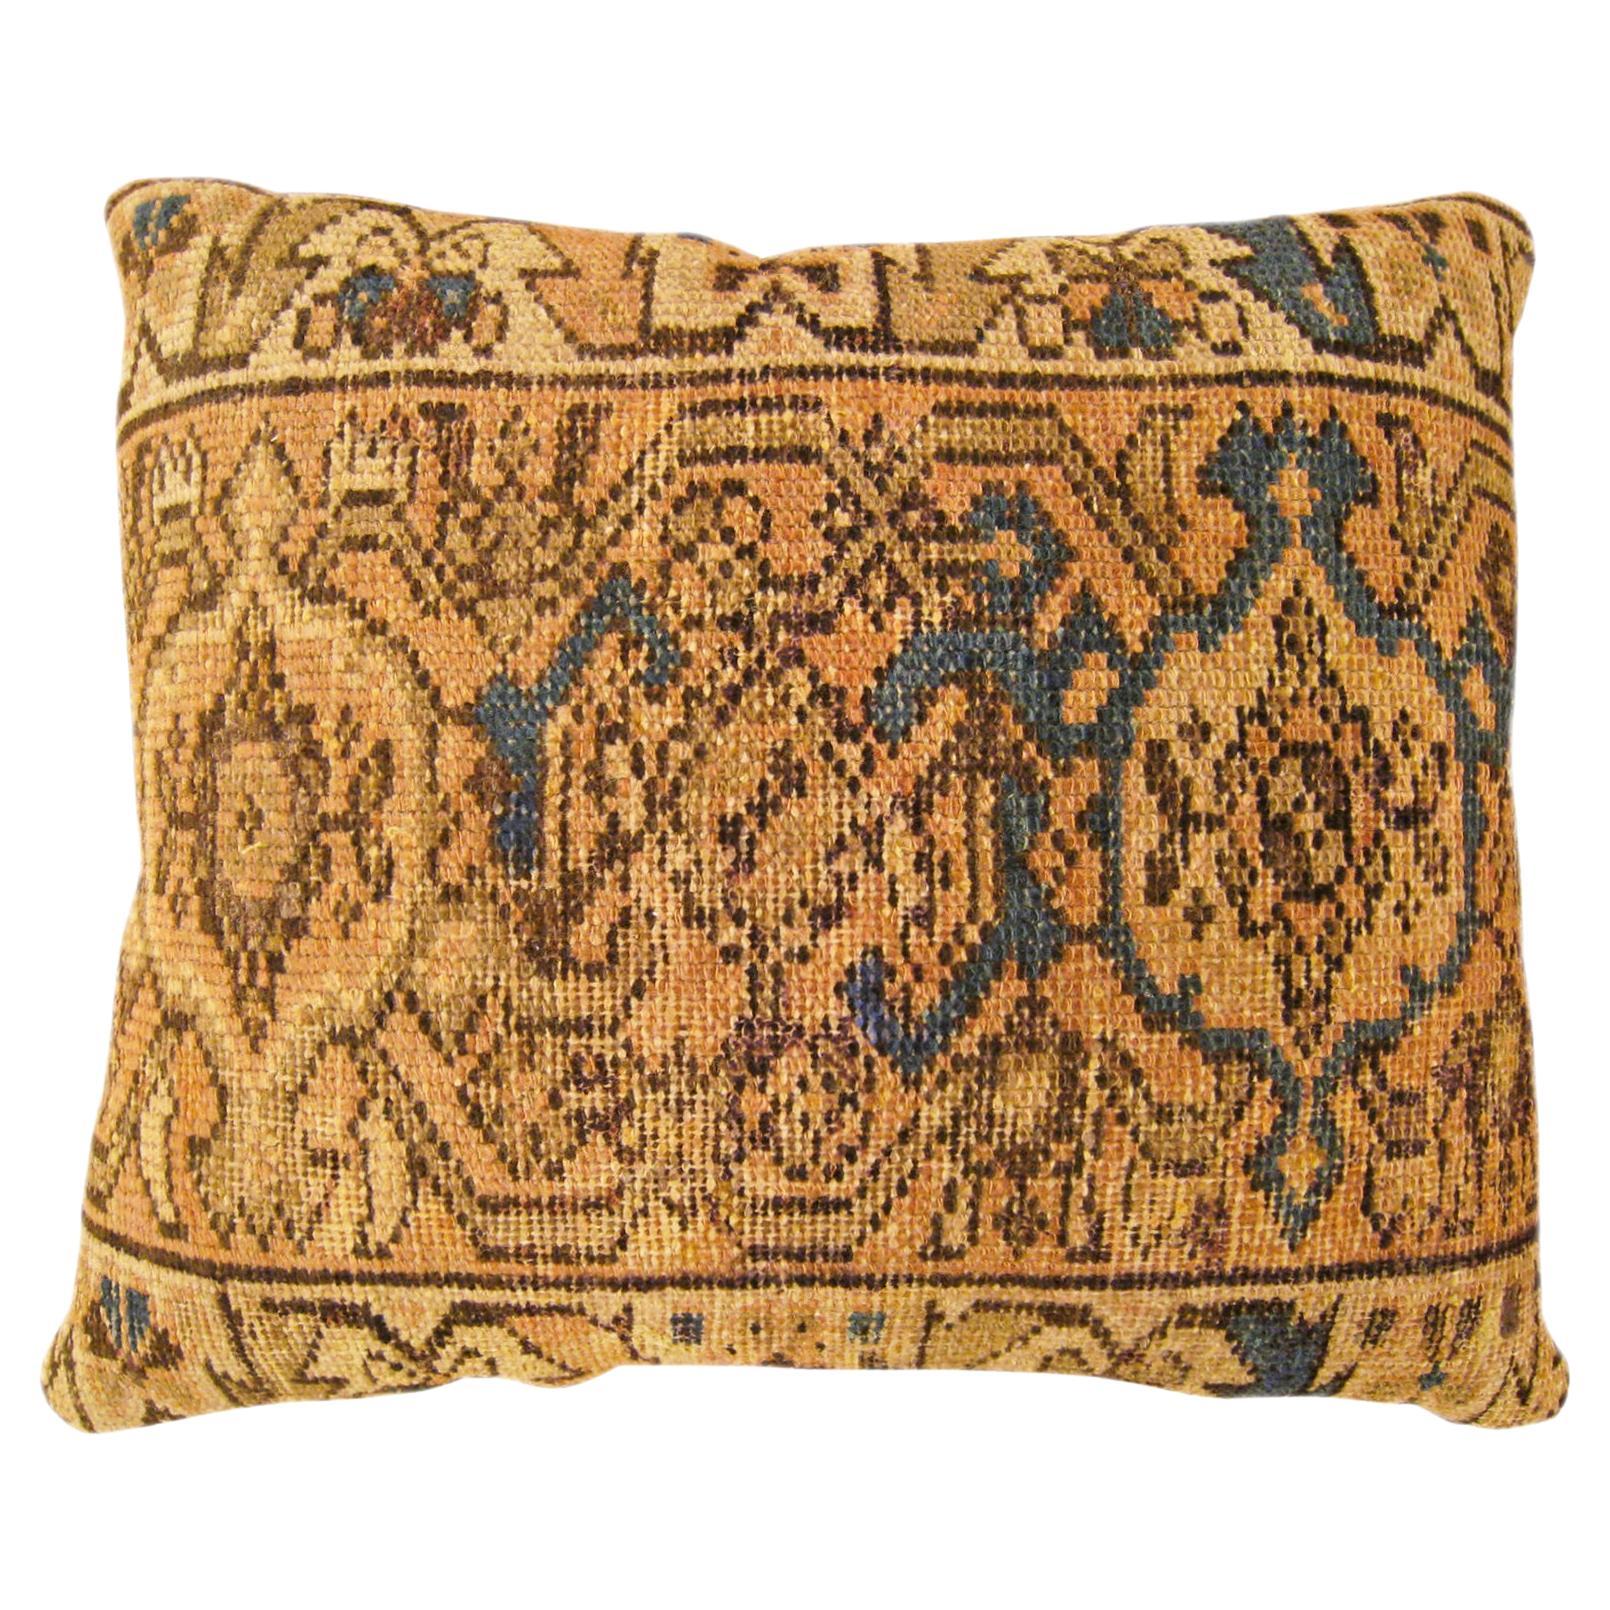 Decorative Antique Persian Hamadan Rug Pillow with Geometric Abstracts Allover For Sale